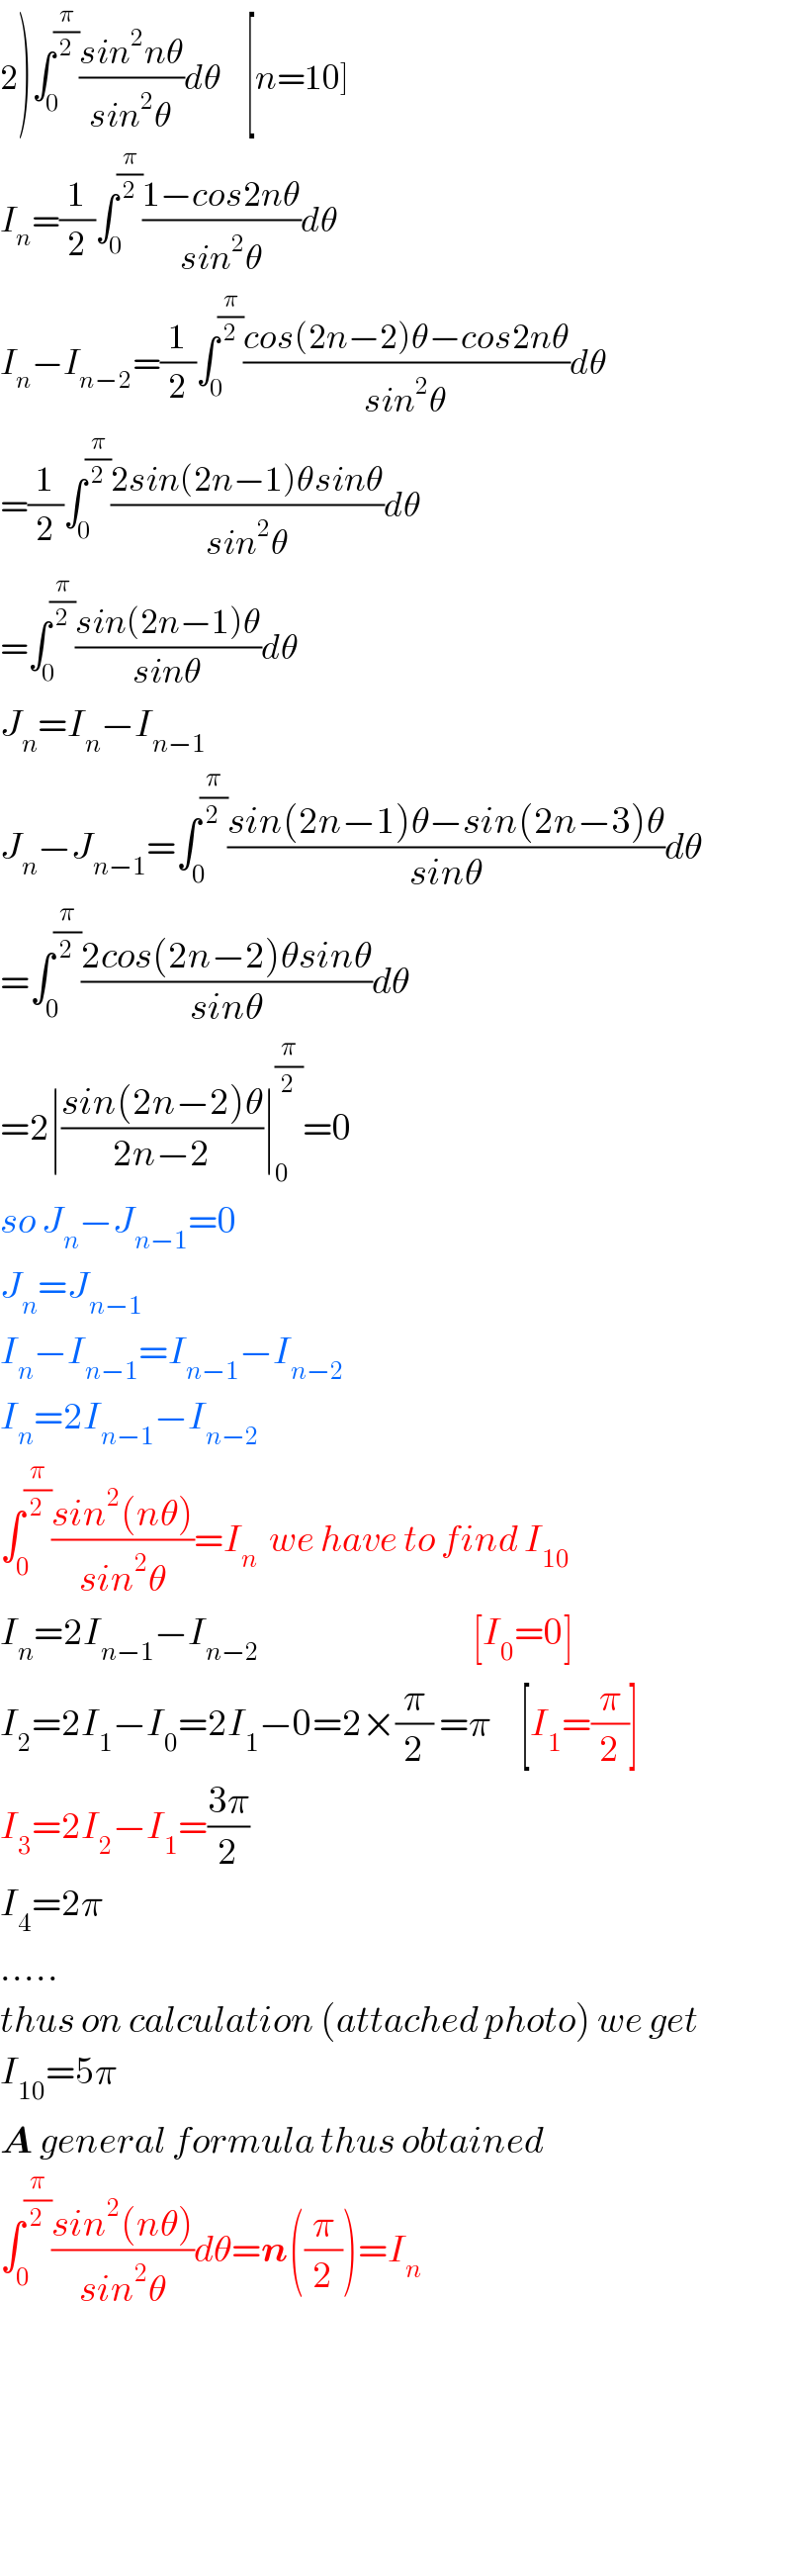 2)∫_0 ^(π/2) ((sin^2 nθ)/(sin^2 θ))dθ    [n=10]  I_n =(1/2)∫_0 ^(π/2) ((1−cos2nθ)/(sin^2 θ))dθ  I_n −I_(n−2) =(1/2)∫_0 ^(π/2) ((cos(2n−2)θ−cos2nθ)/(sin^2 θ))dθ  =(1/2)∫_0 ^(π/2) ((2sin(2n−1)θsinθ)/(sin^2 θ))dθ  =∫_0 ^(π/2) ((sin(2n−1)θ)/(sinθ))dθ  J_n =I_n −I_(n−1)   J_n −J_(n−1) =∫_0 ^(π/2) ((sin(2n−1)θ−sin(2n−3)θ)/(sinθ))dθ  =∫_0 ^(π/2) ((2cos(2n−2)θsinθ)/(sinθ))dθ  =2∣((sin(2n−2)θ)/(2n−2))∣_0 ^(π/2) =0  so J_n −J_(n−1) =0  J_n =J_(n−1)   I_n −I_(n−1) =I_(n−1) −I_(n−2)   I_n =2I_(n−1) −I_(n−2)   ∫_0 ^(π/2) ((sin^2 (nθ))/(sin^2 θ))=I_n   we have to find I_(10)   I_n =2I_(n−1) −I_(n−2)                                     [I_0 =0]  I_2 =2I_1 −I_0 =2I_1 −0=2×(π/2) =π     [I_1 =(π/2)]  I_3 =2I_2 −I_1 =((3π)/2)  I_4 =2π  .....  thus on calculation (attached photo) we get  I_(10) =5π  A general formula thus obtained  ∫_0 ^(π/2) ((sin^2 (nθ))/(sin^2 θ))dθ=n((π/2))=I_n           